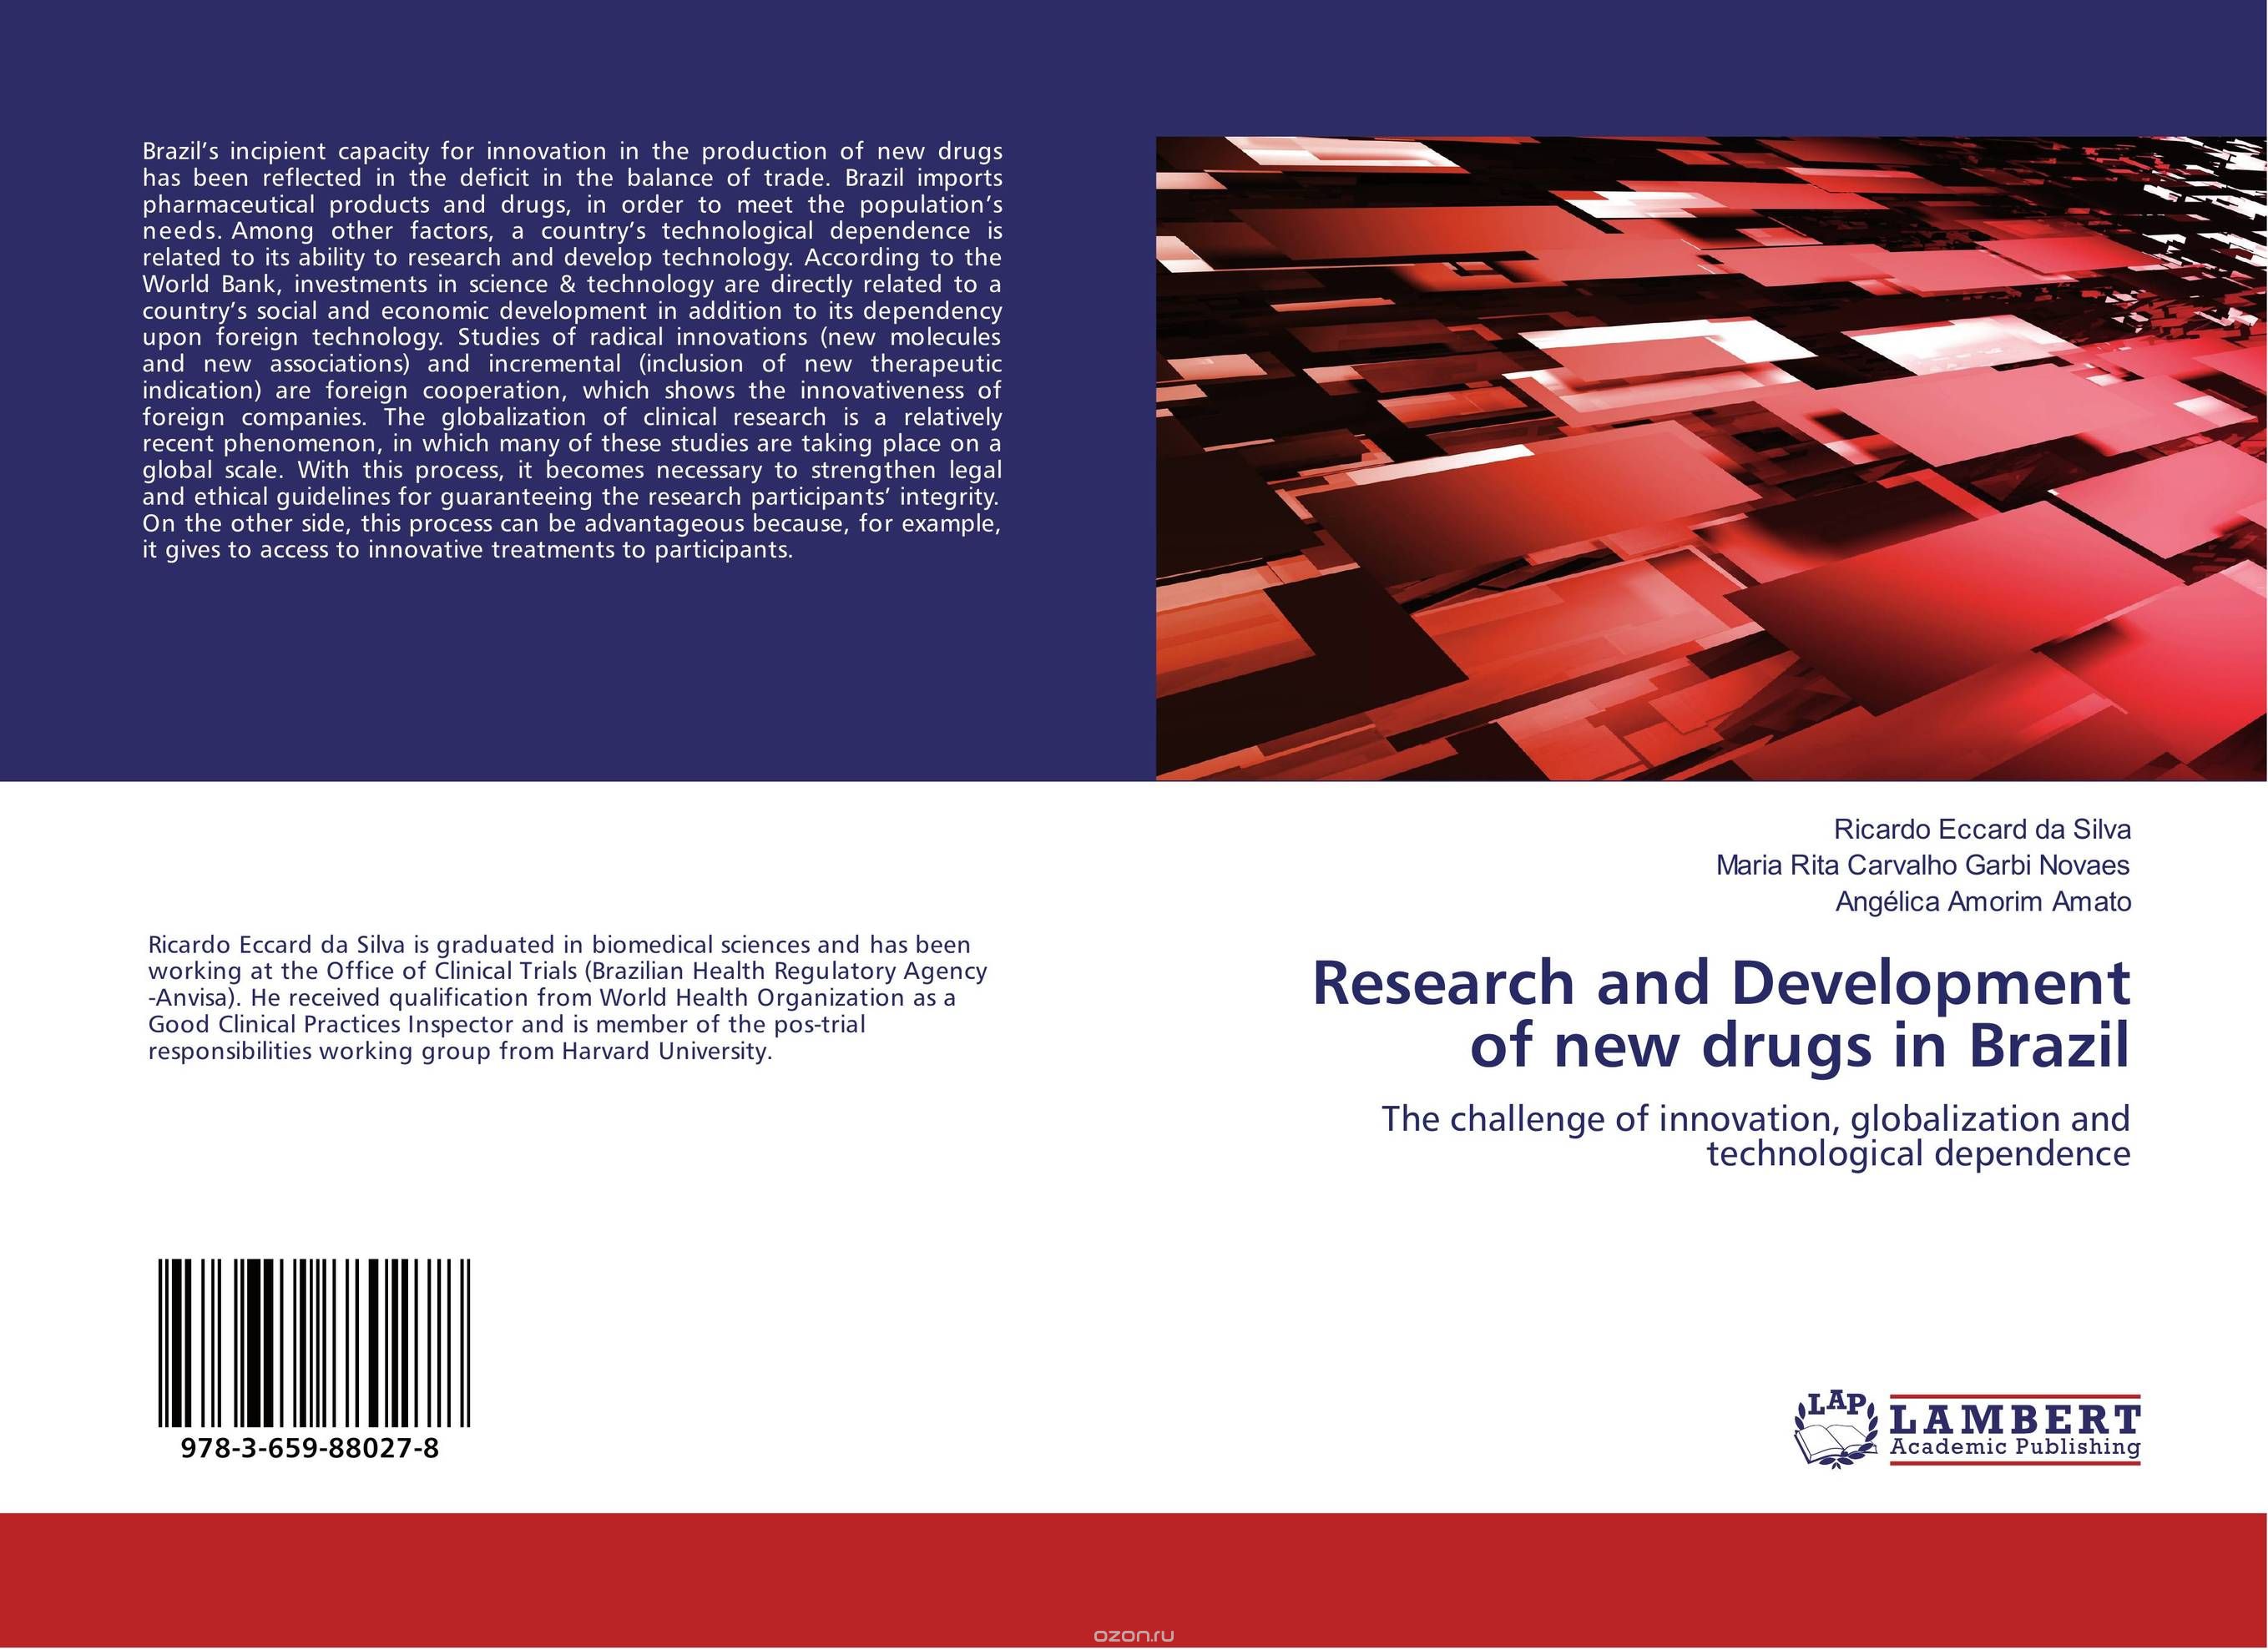 Research and Development of new drugs in Brazil